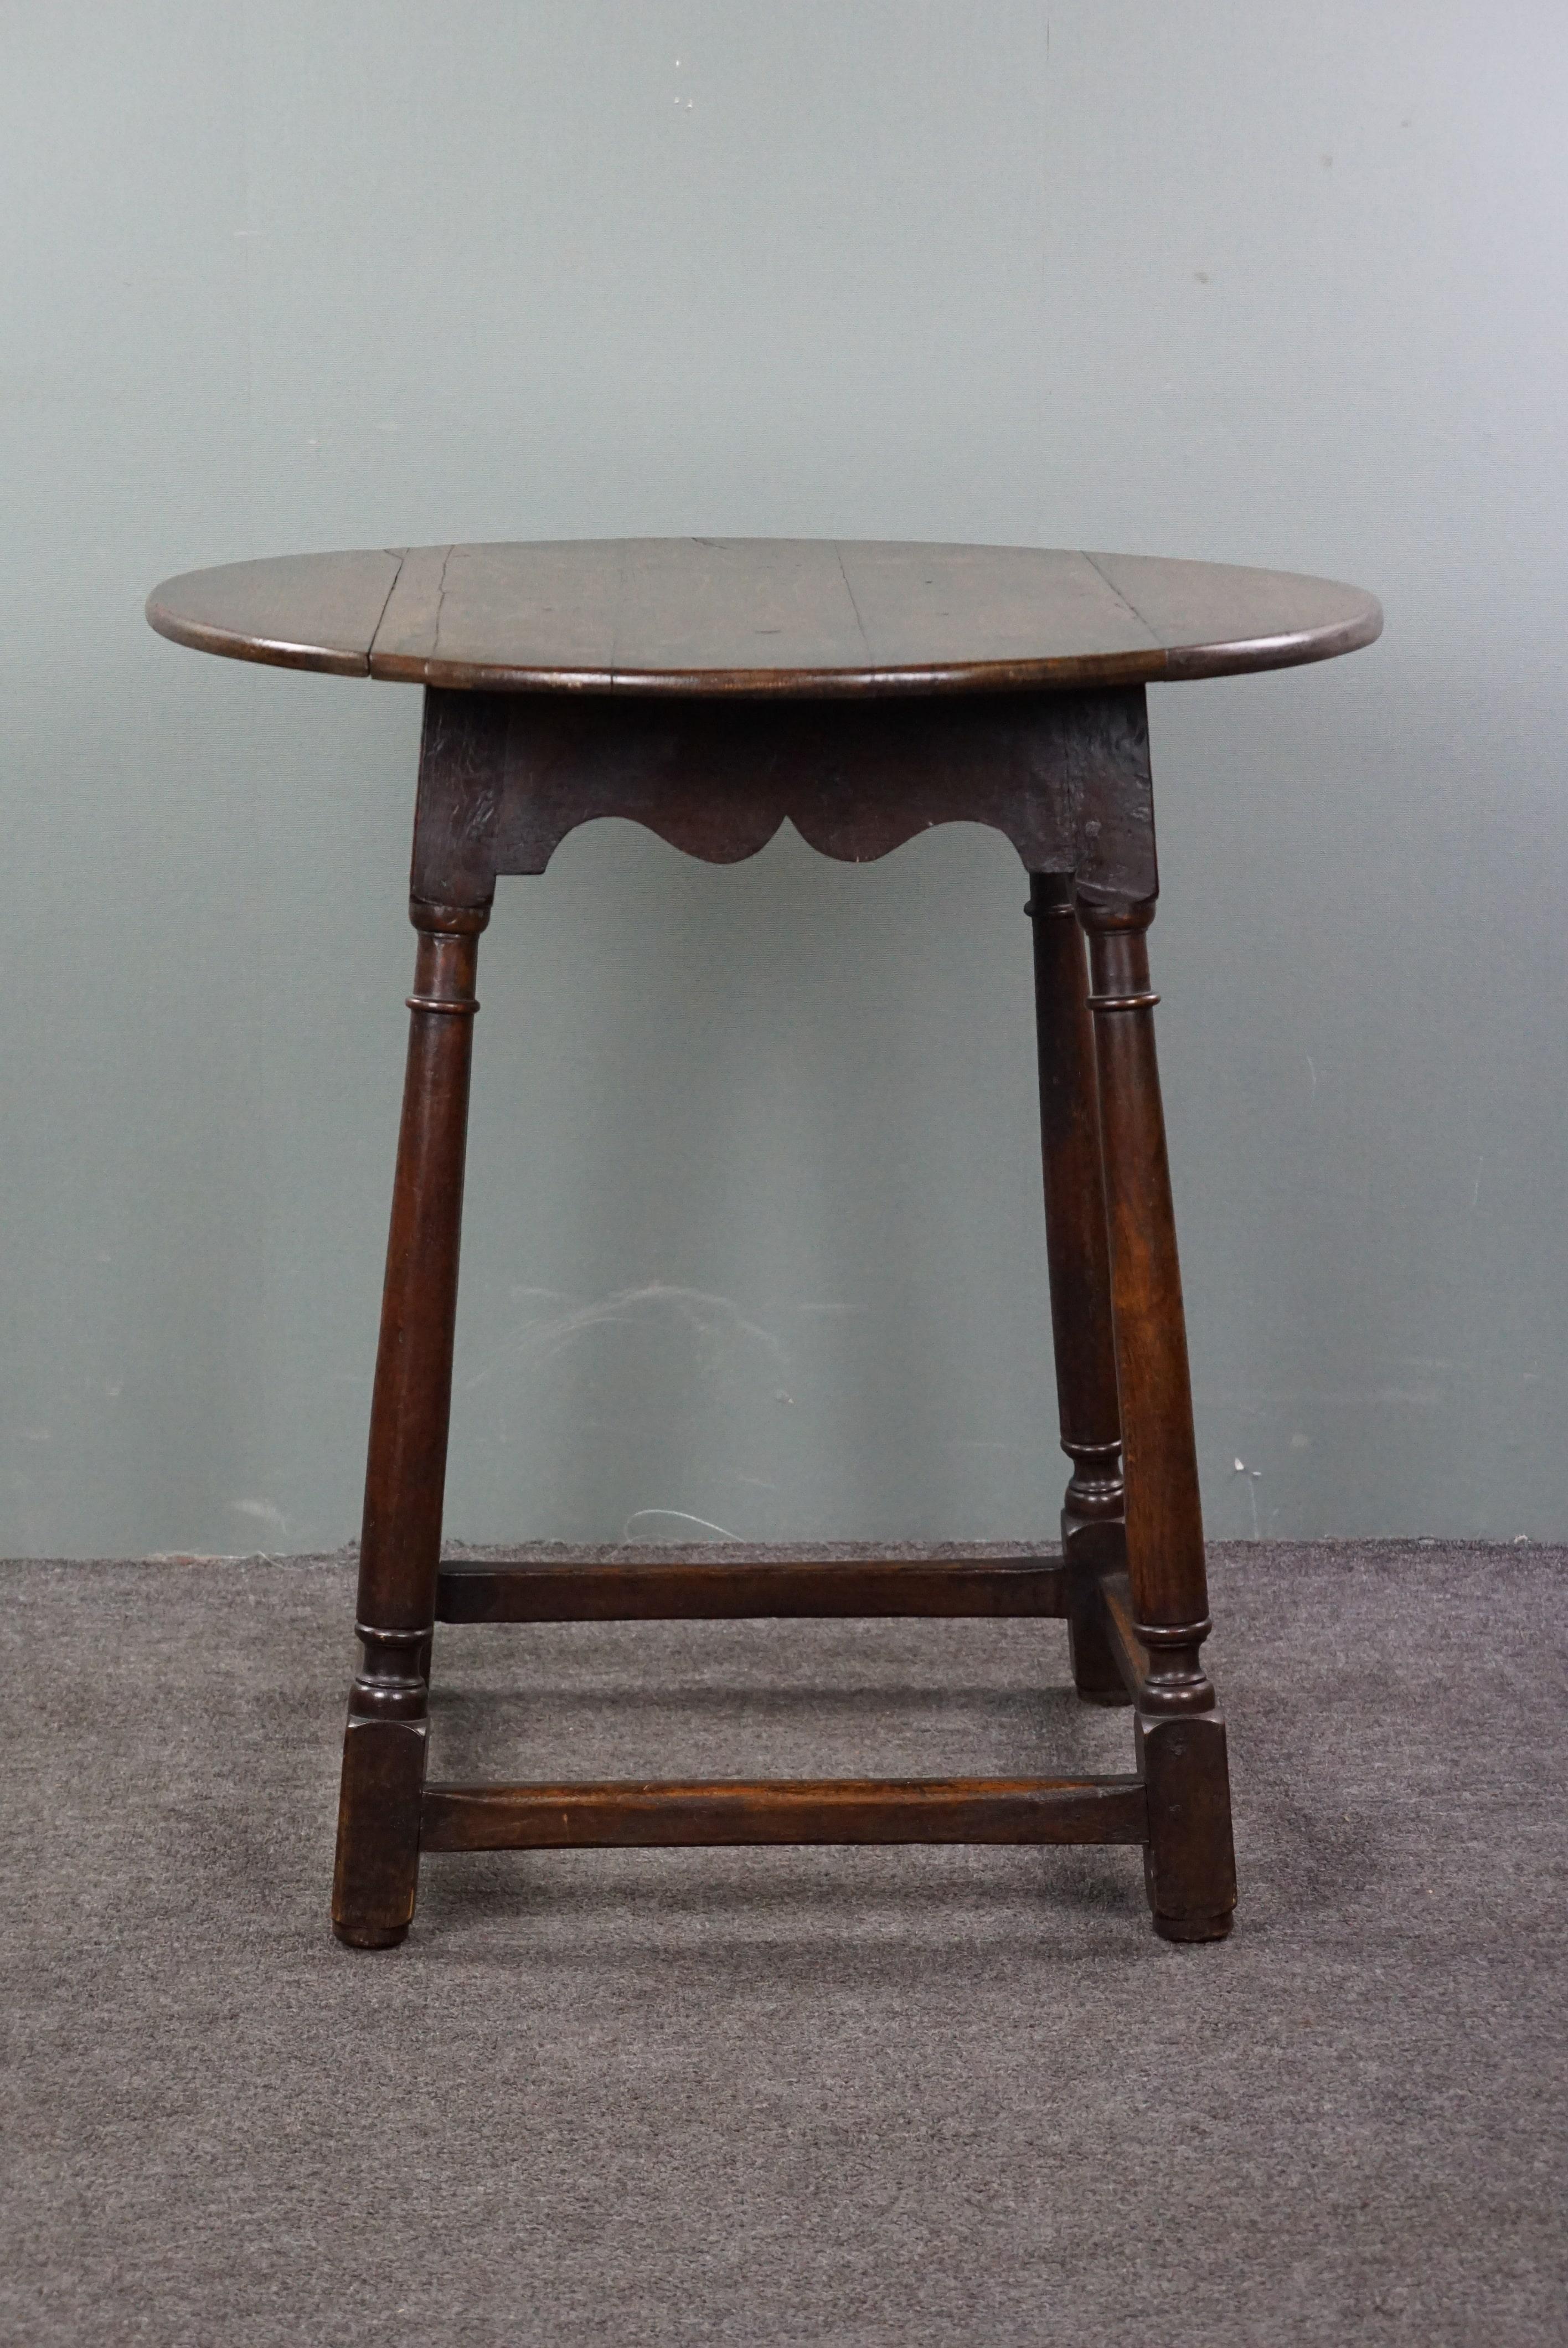 Offered is this beautiful and well-preserved round 18th-century English oak center table/side table in good condition. Where old and new come together, one is very likely to encounter an item like this. A table like this fits perfectly into a modern